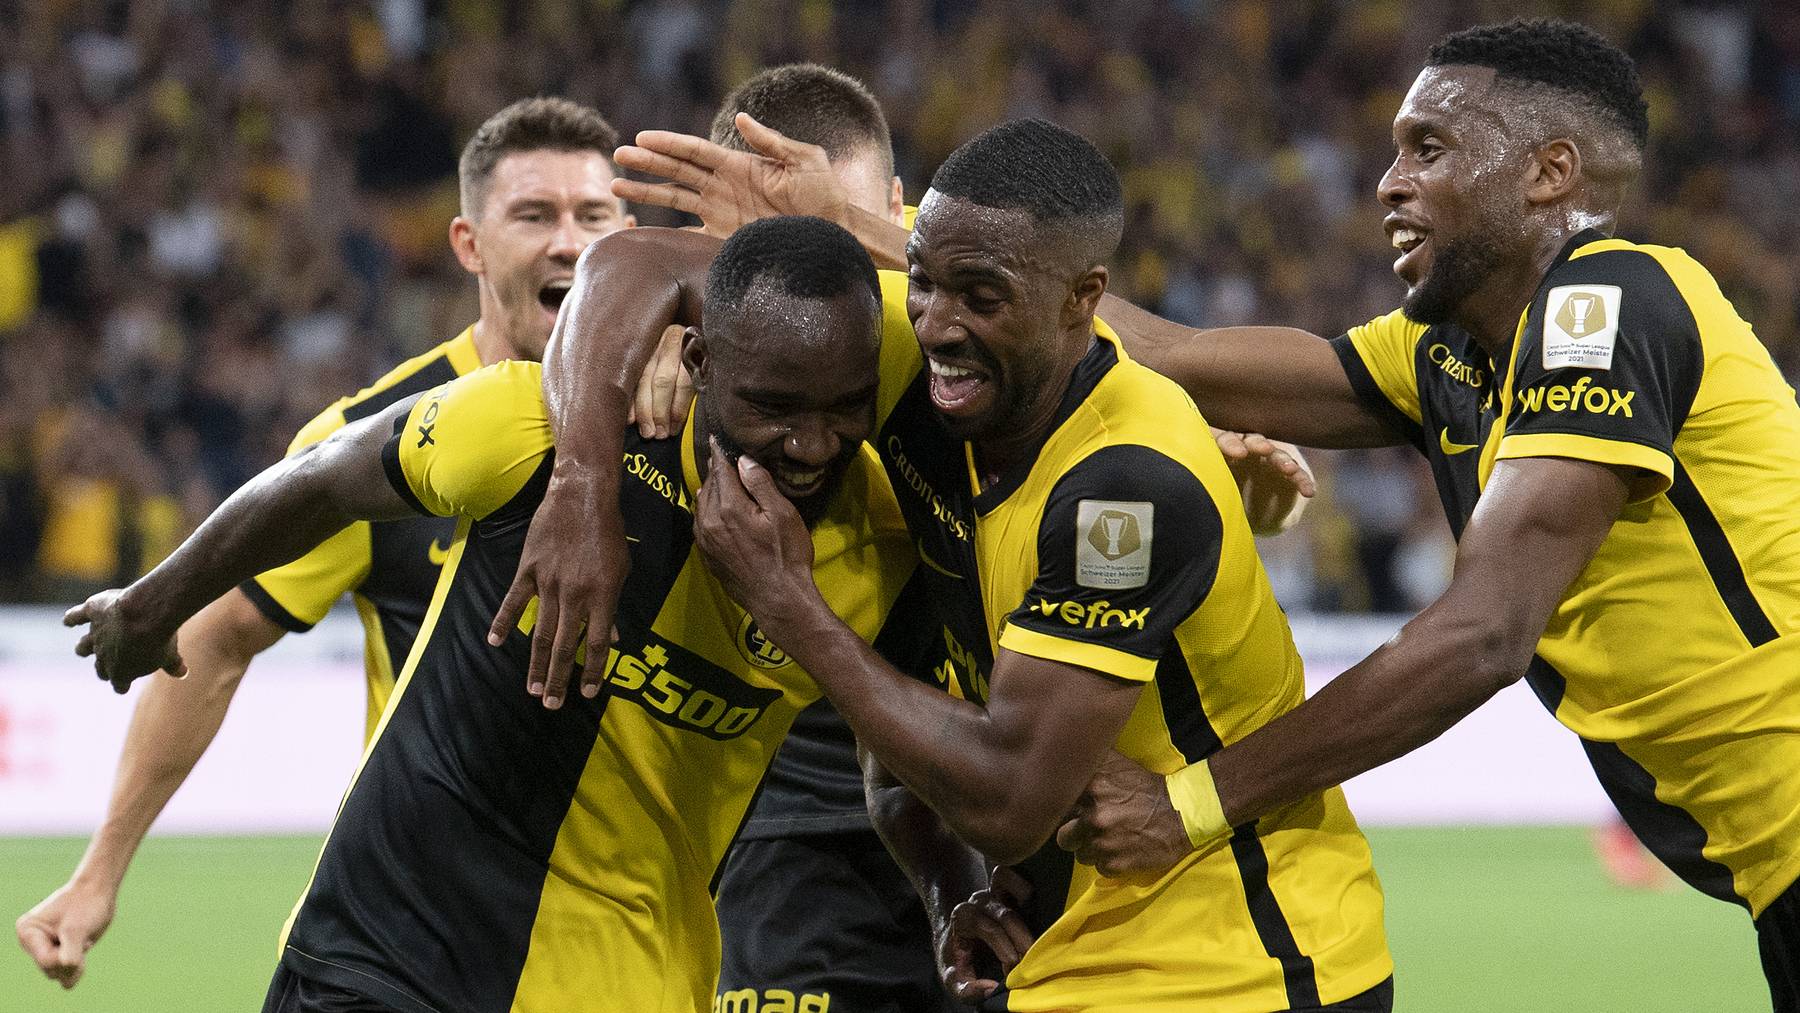 Young Boys' Nicolas Ngamaleu, Ulisses Garcia and Jordan Siebatcheu, from left, celebrate their score to 2-1 during the UEFA Champions League 2nd leg third qualifying round soccer match between BSC YB and CFR Cluj of Romania, at the Wankdorf stadium on Tuesday, August 10, 2021 in Bern, Switzerland.